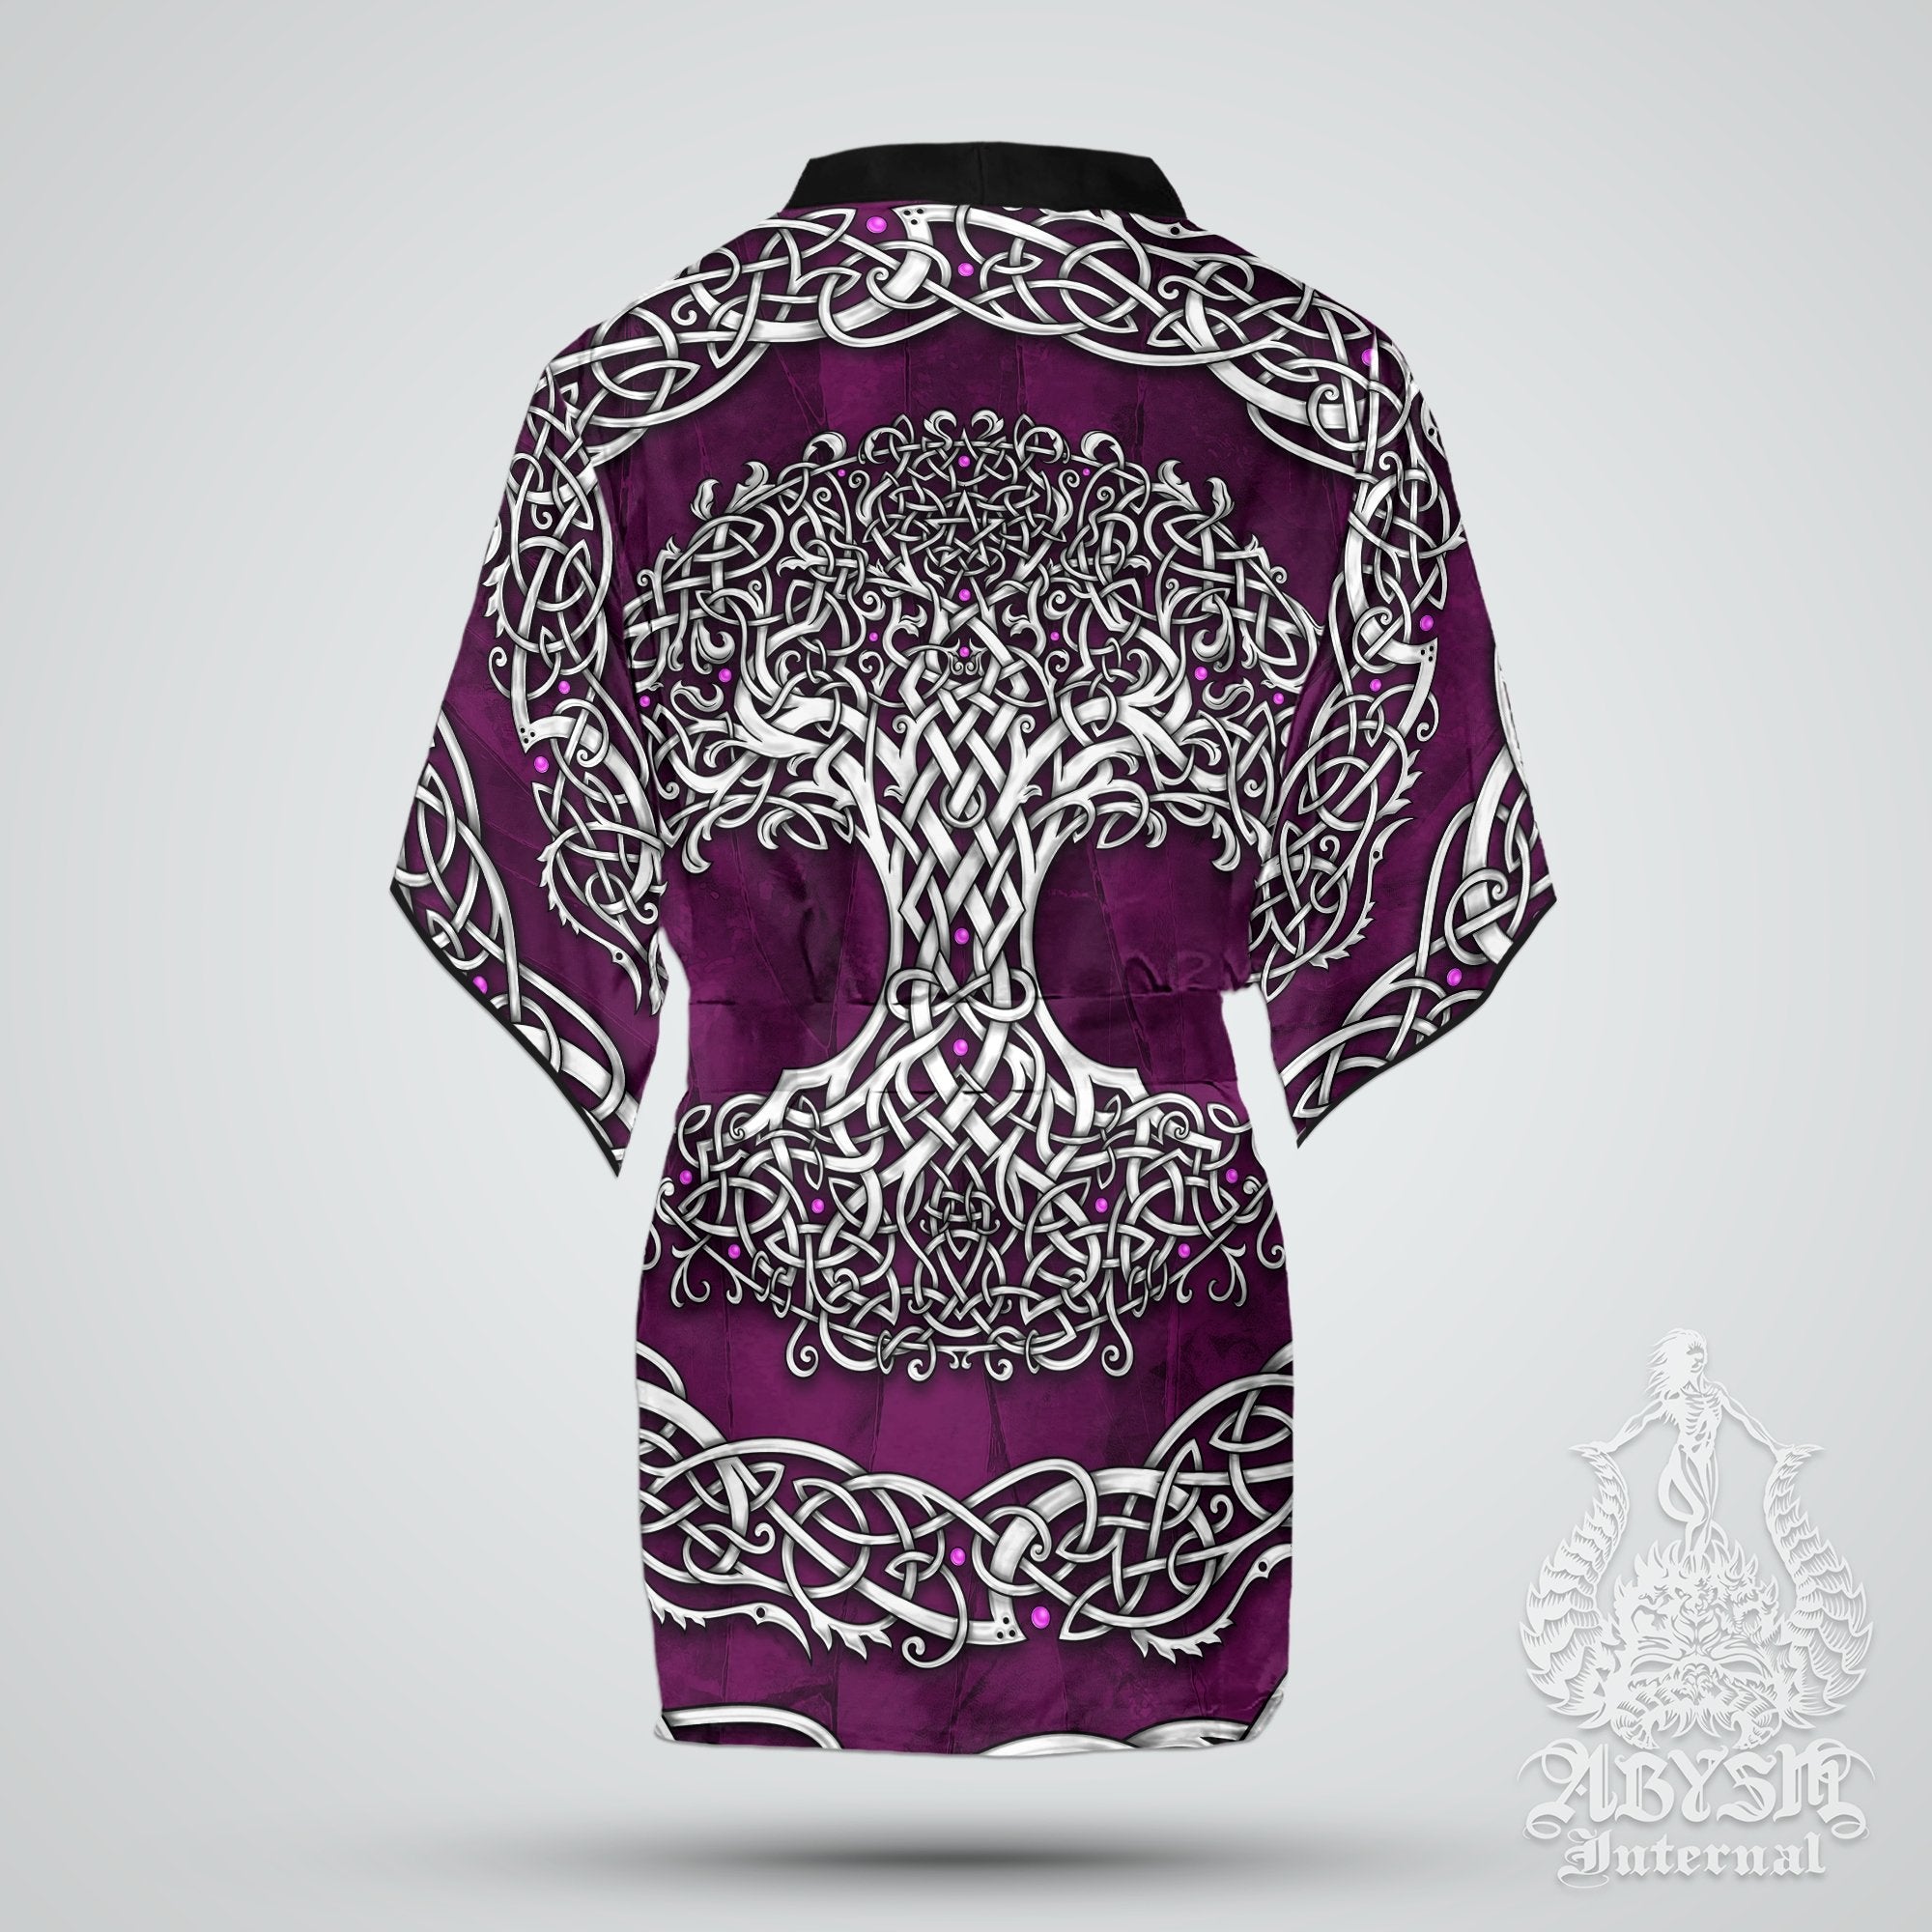 Tree of Life Cover Up, Beach Outfit, Celtic Party Kimono, Wicca Summer Festival Robe, Witchy Indie and Alternative Clothing, Unisex - White Purple - Abysm Internal